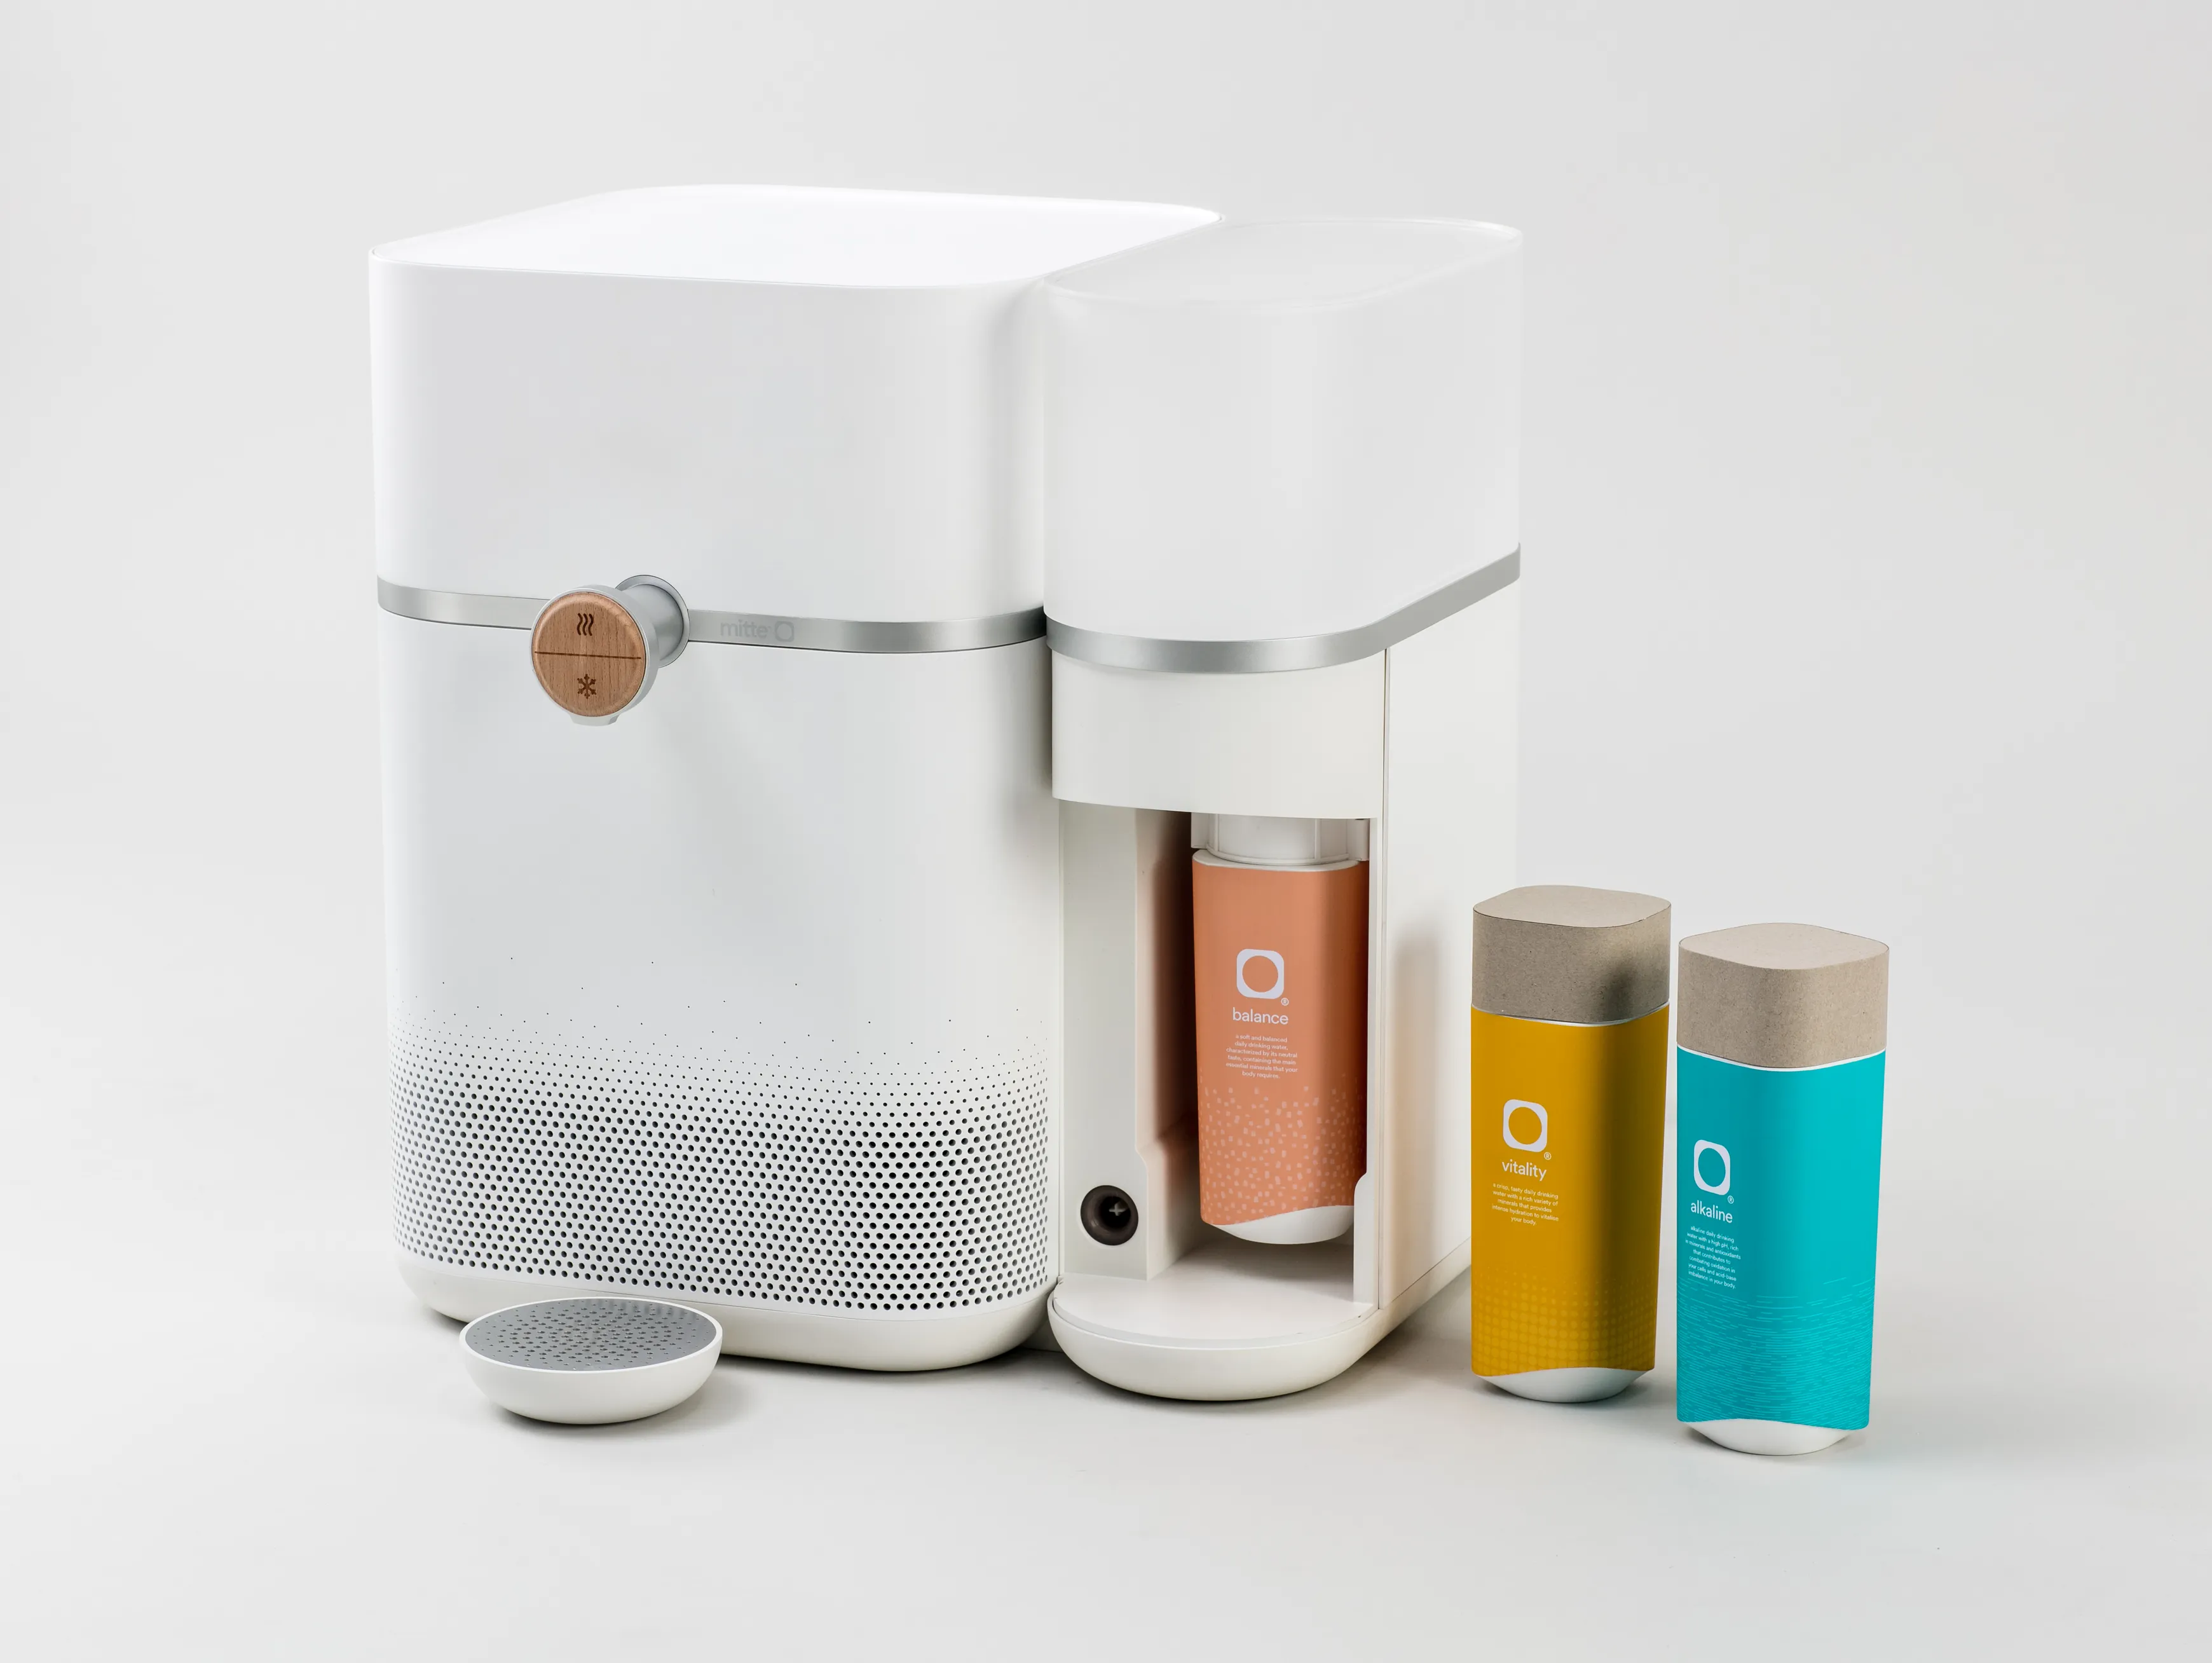 The Mitte water purifier with its panel taken off displaying the purification cartridges